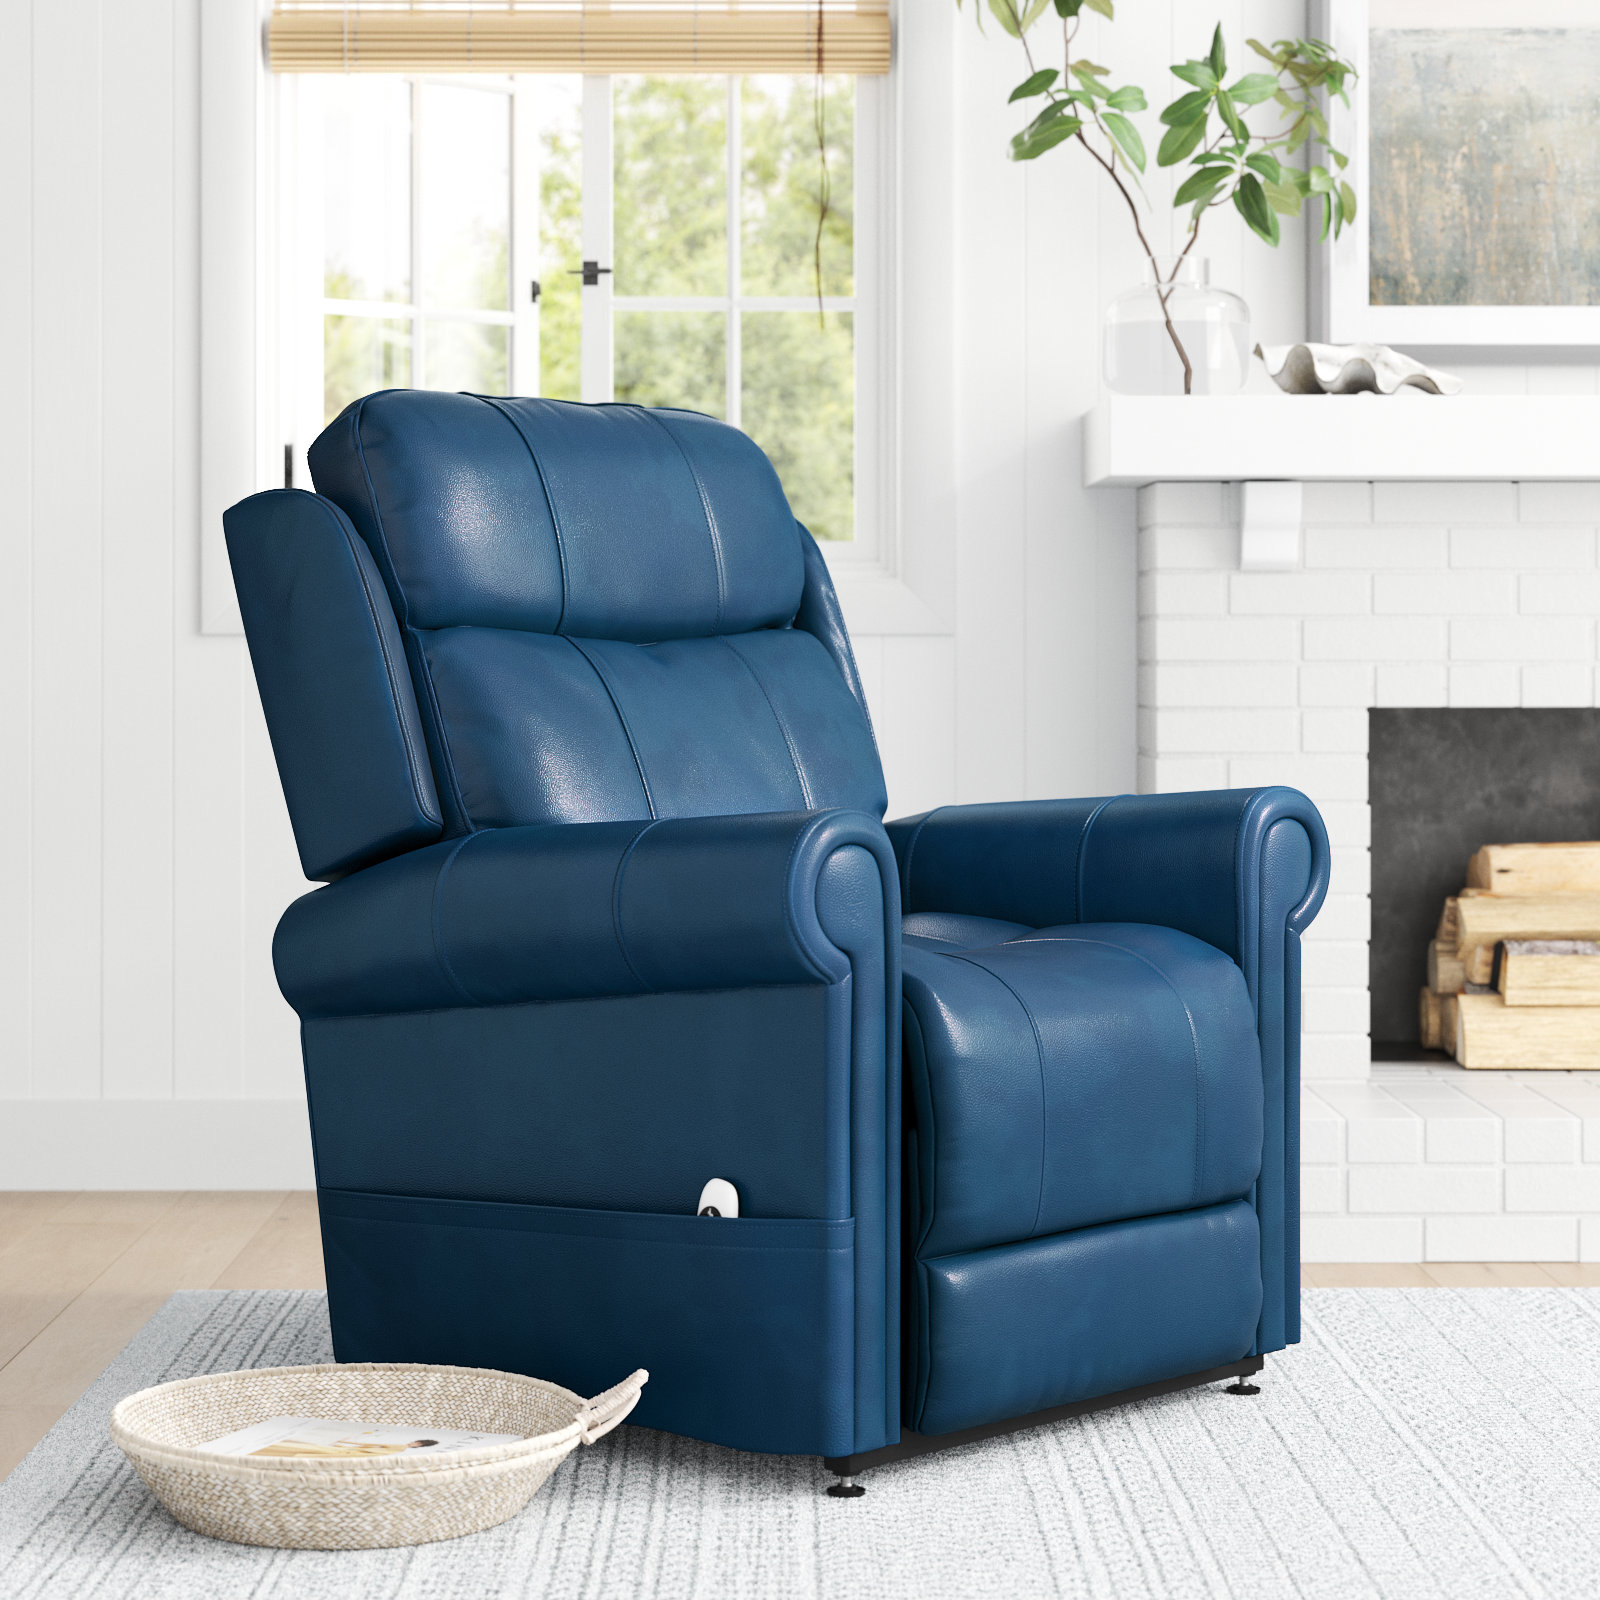 Indulge in Comfort: The Allure of a Blue Leather Recliner缩略图